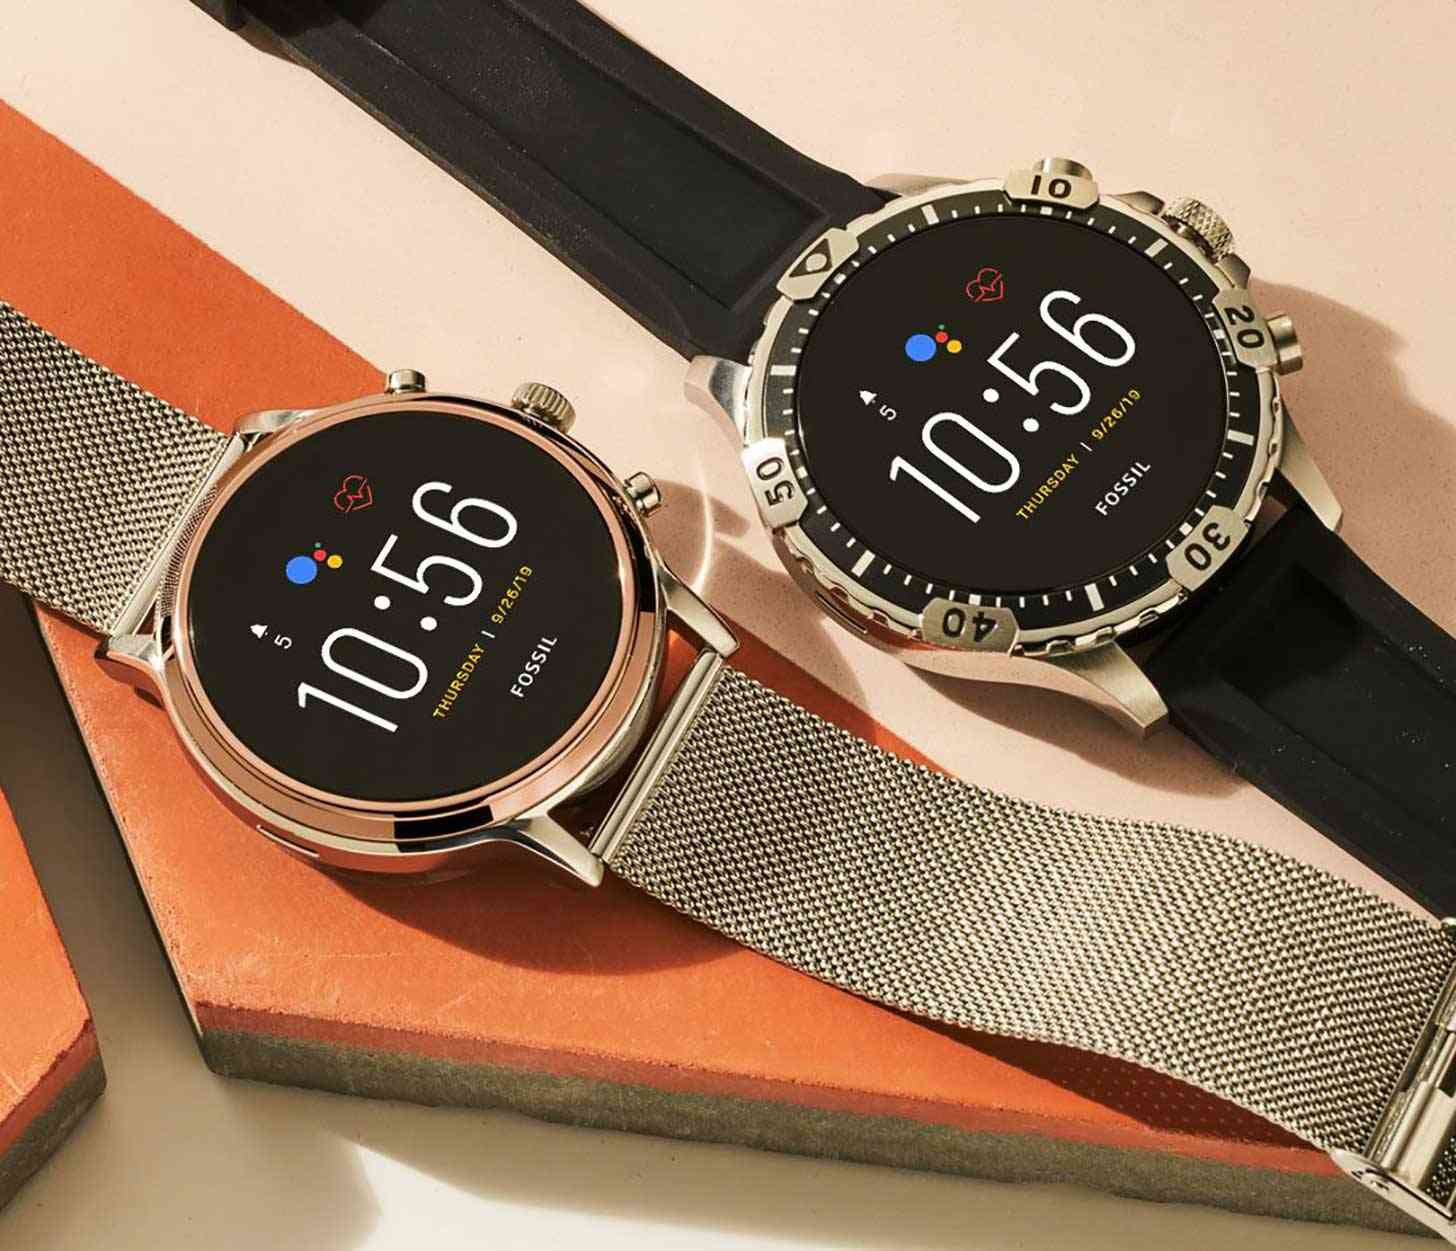 Fossil Gen 5 smartwatches get update with sleep tracking, new battery mode features News.Wirefly